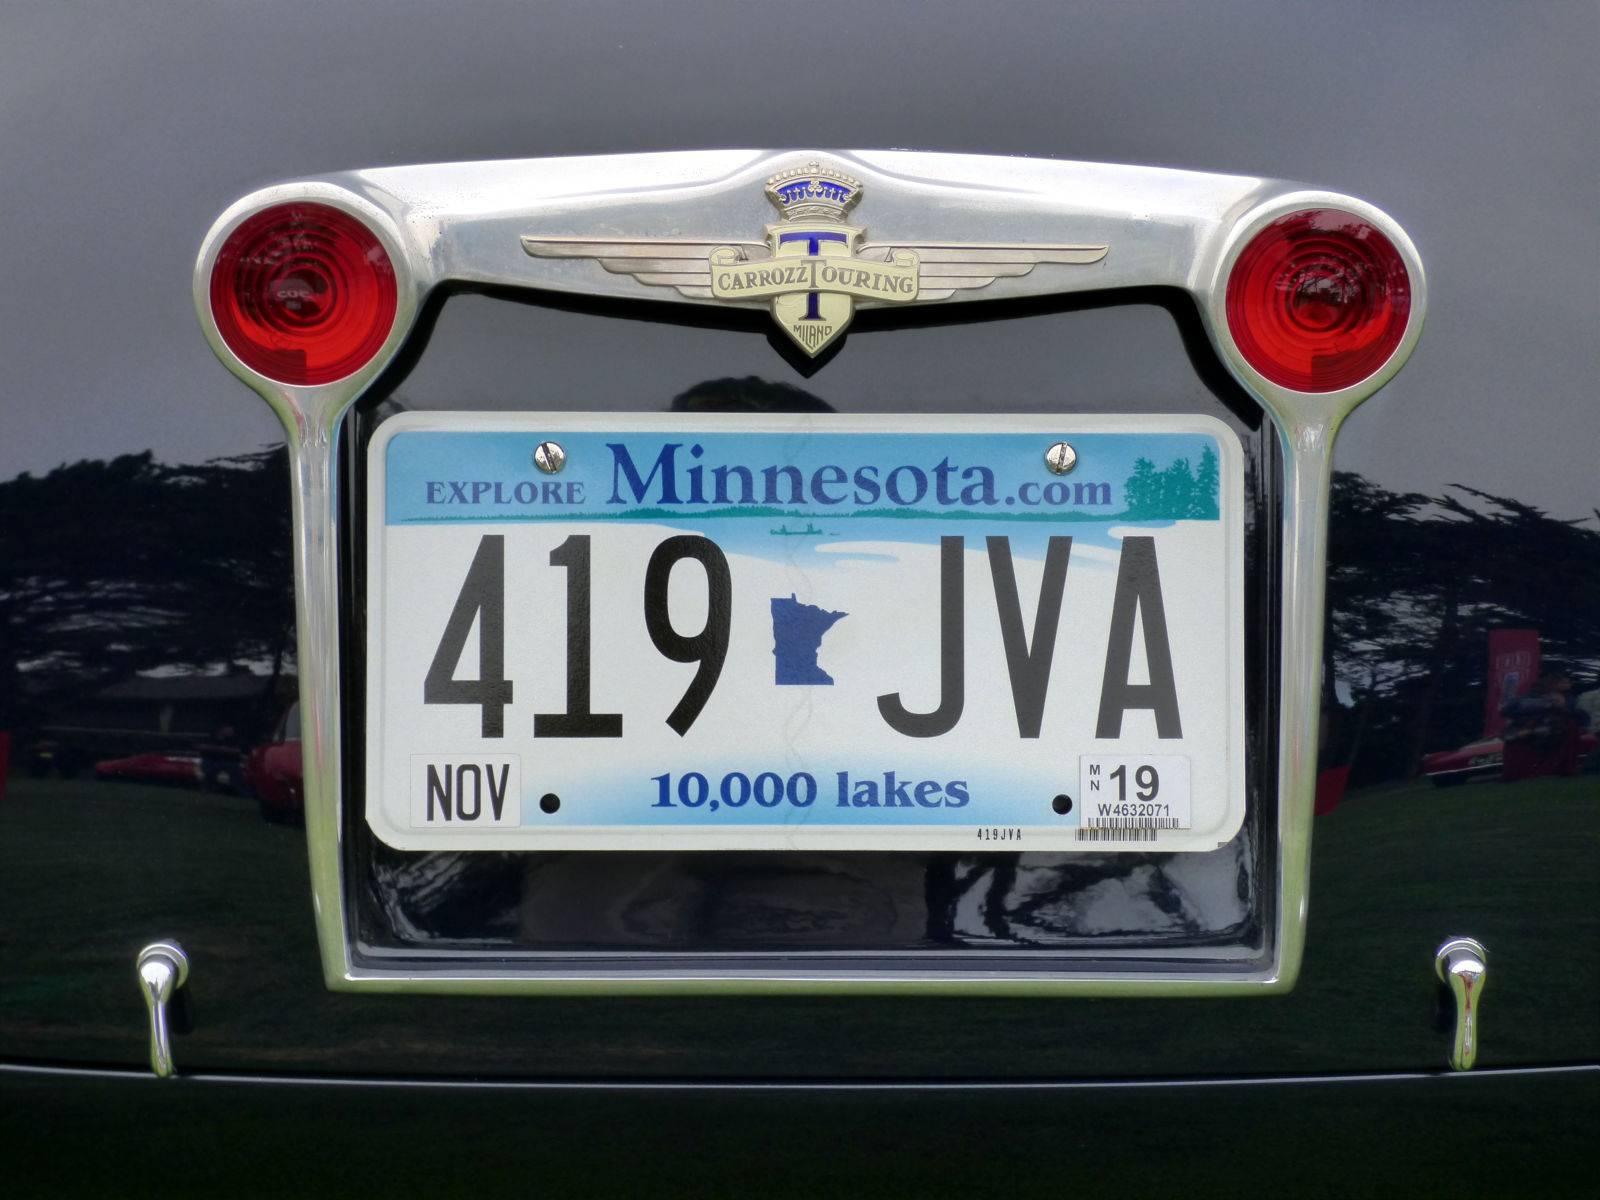 This is how you should frame a license plate.